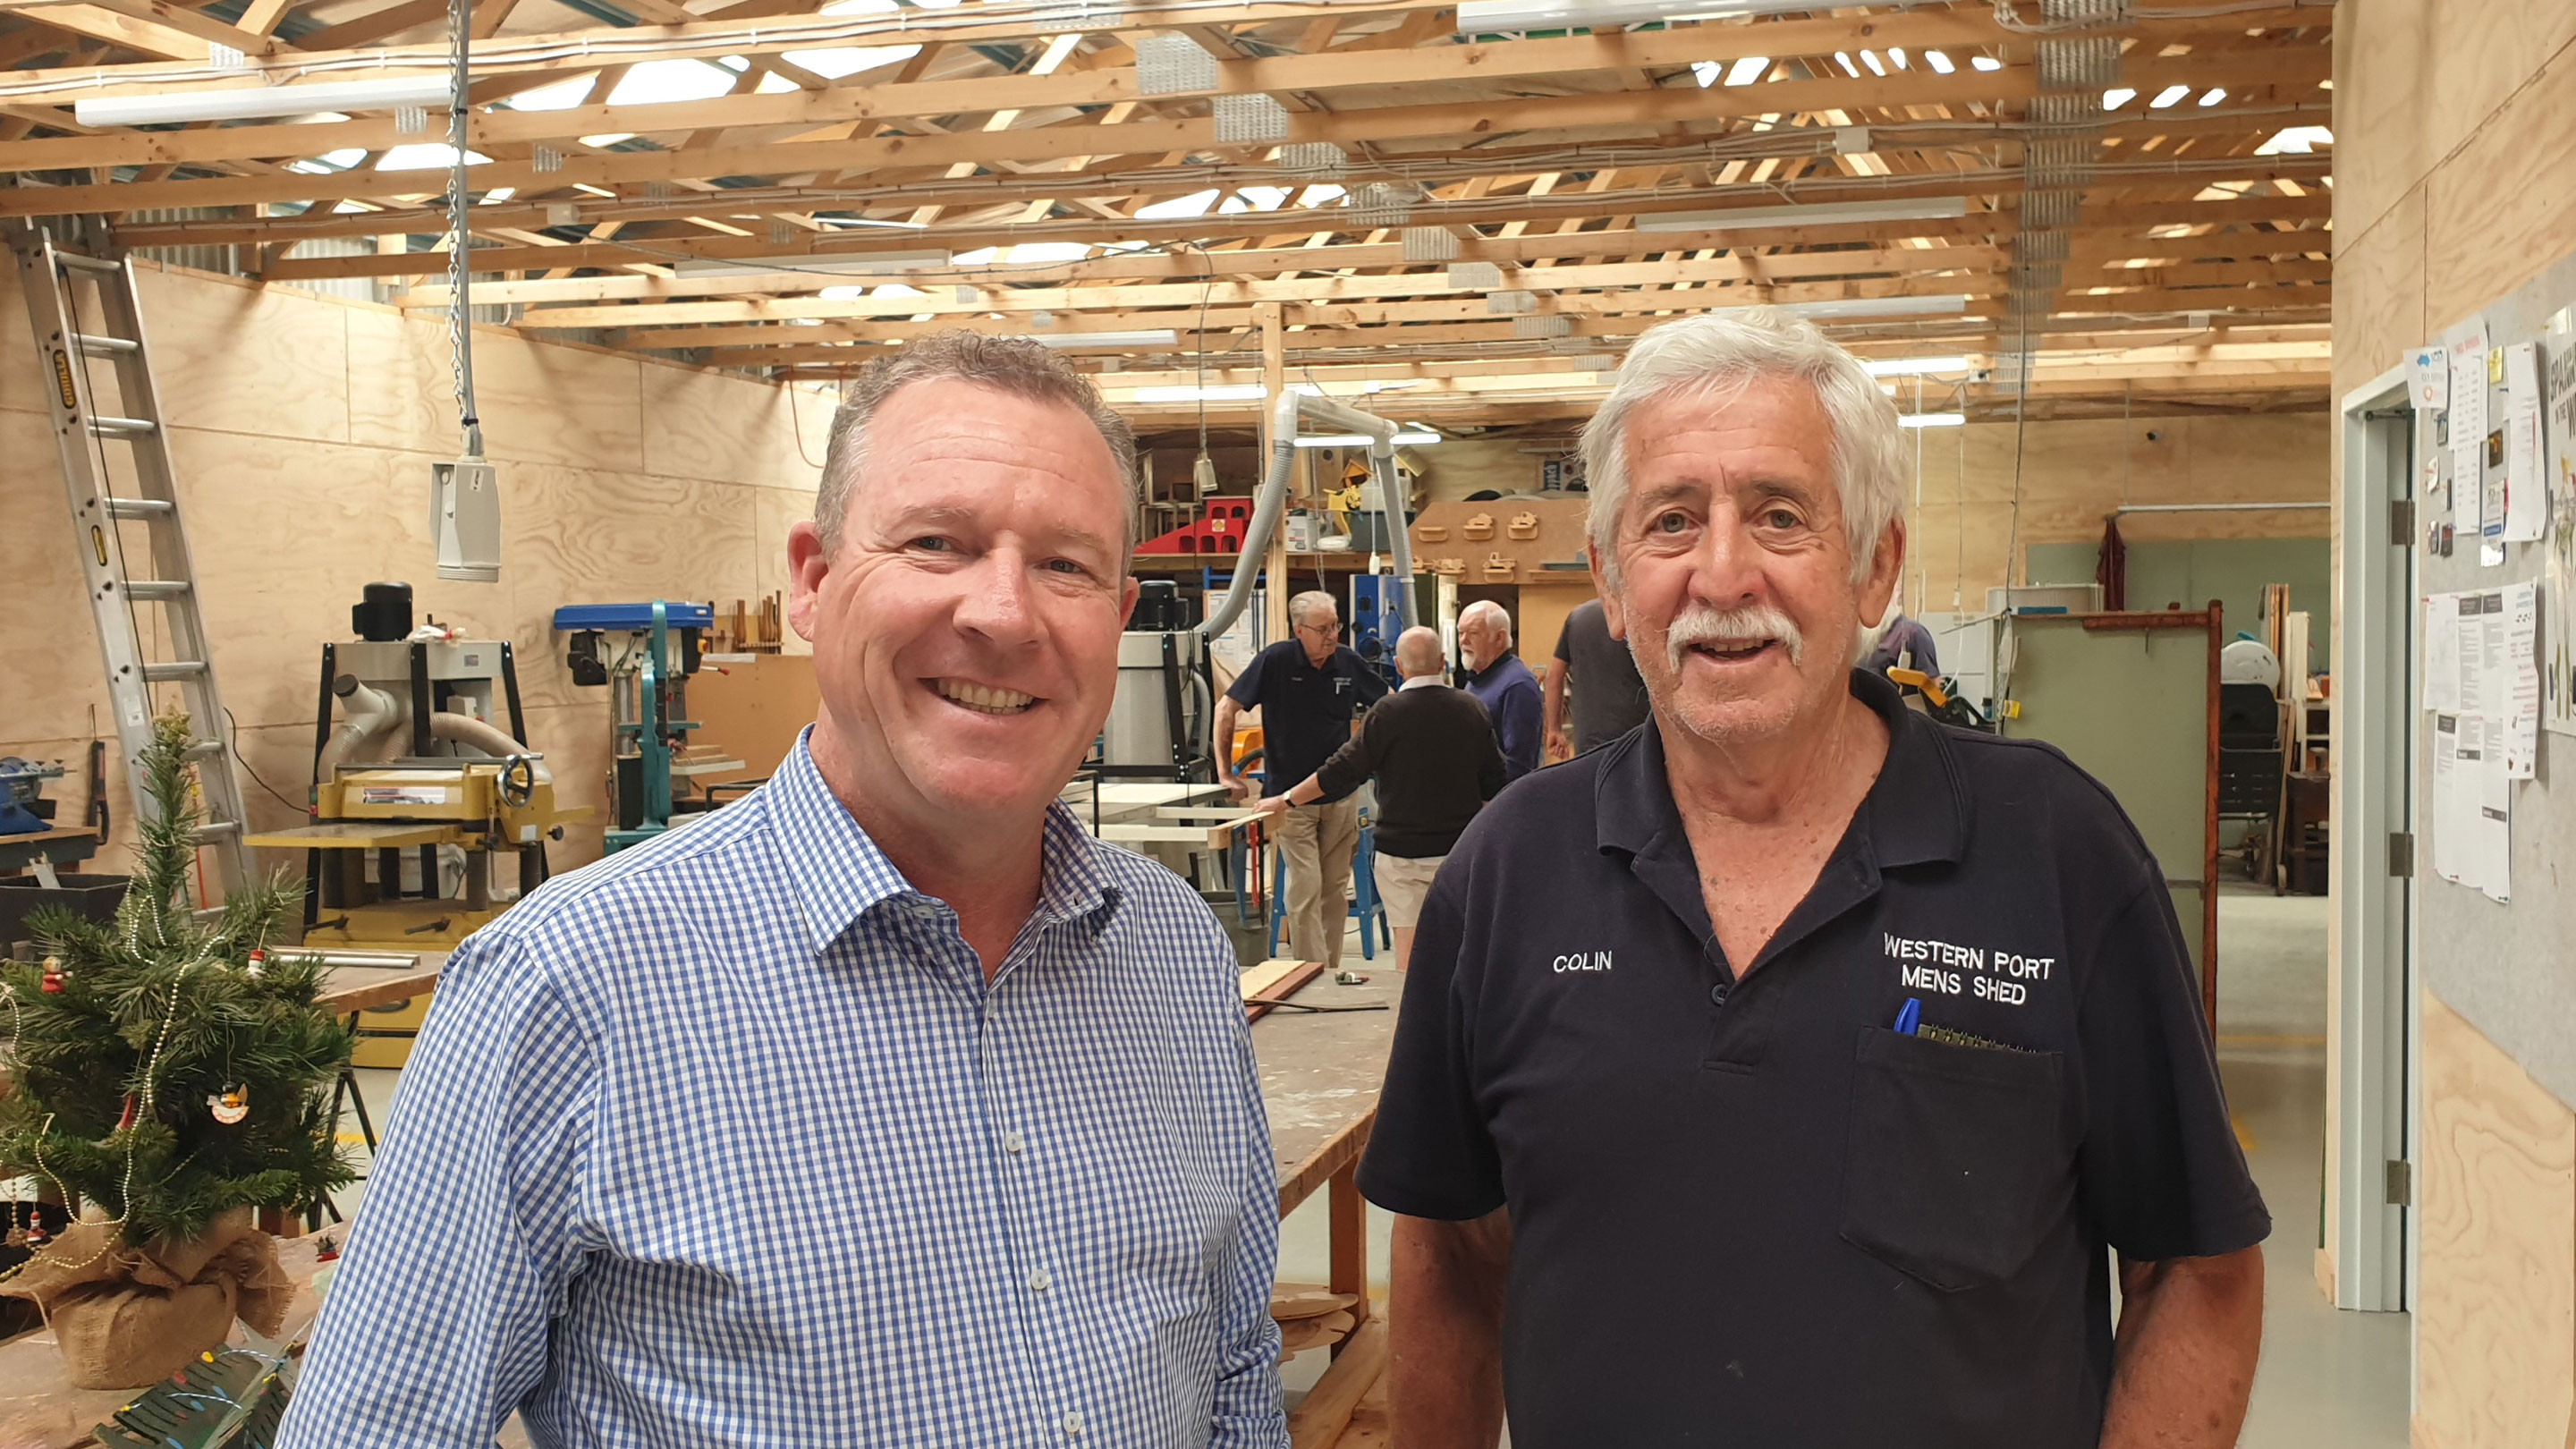 Image Esso Long Island Point Manager, David McCord (left), visited the Western Port Men's Shed before Christmas to view the new solar panels that had just been installed with help from Esso Australia.